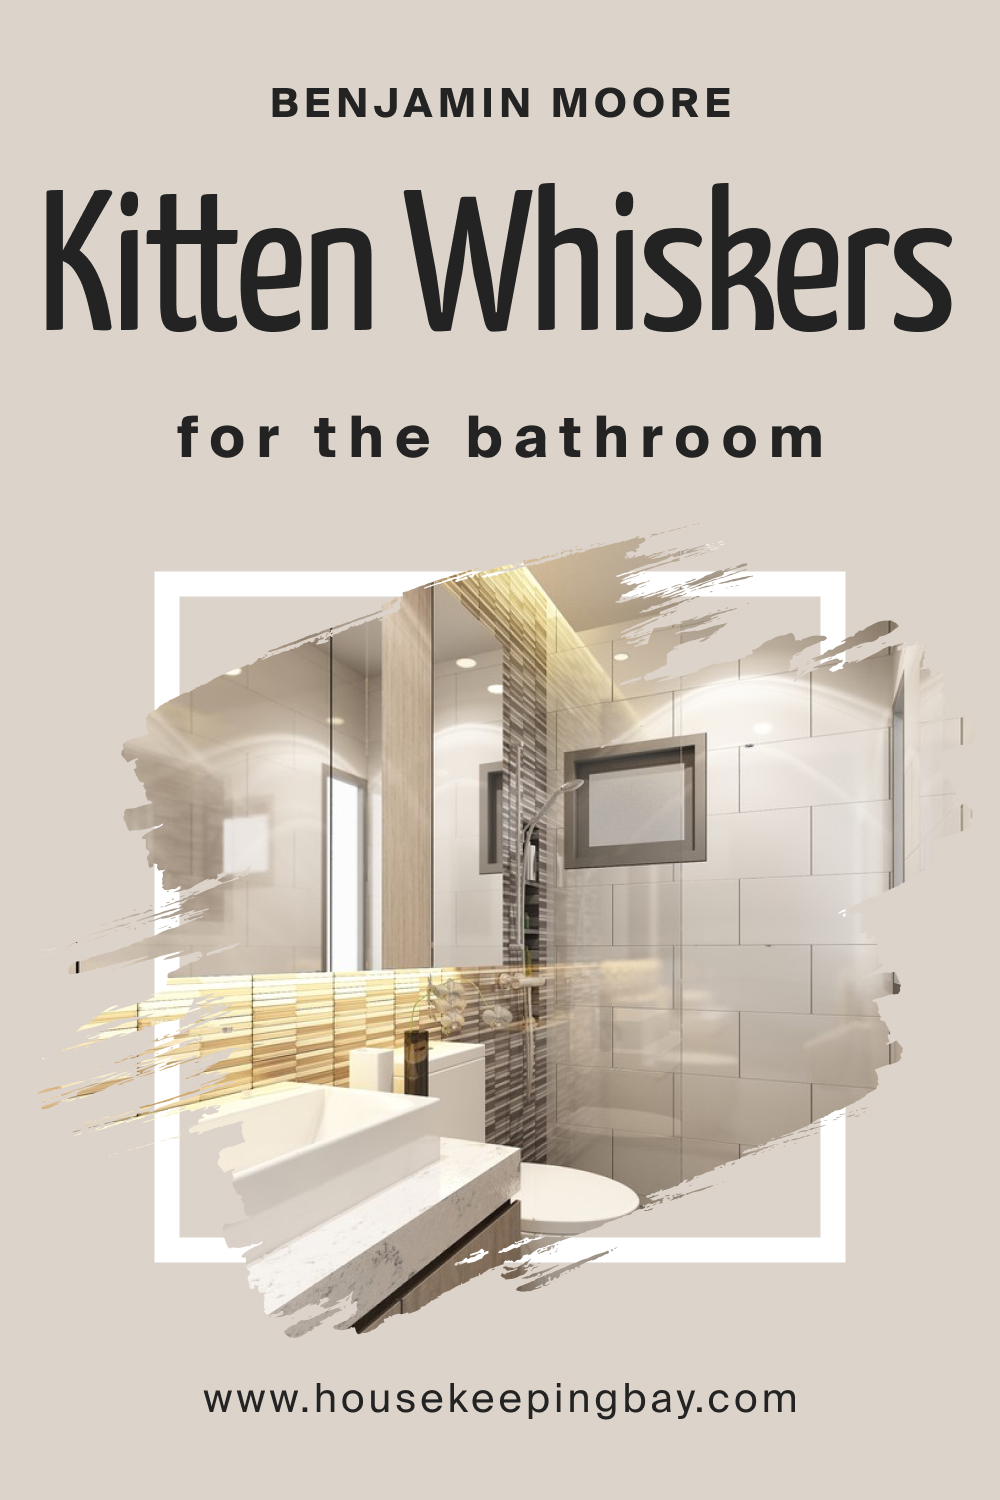 How to Use BM Kitten Whiskers 1003 in the Bathroom?